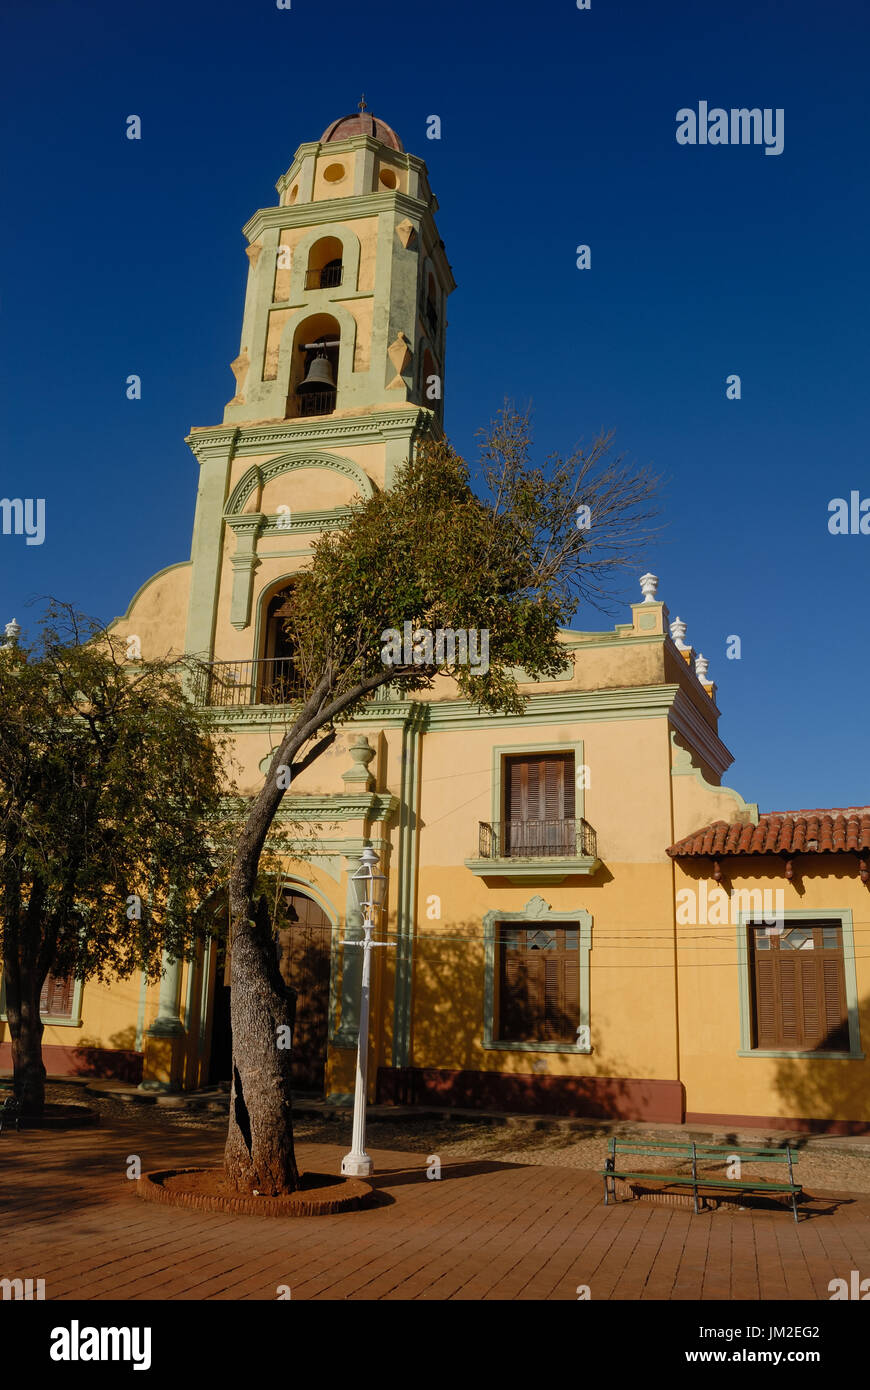 The church tower by the square in Trinidad, Cuba with a bench and tree in front of the chruch. Stock Photo